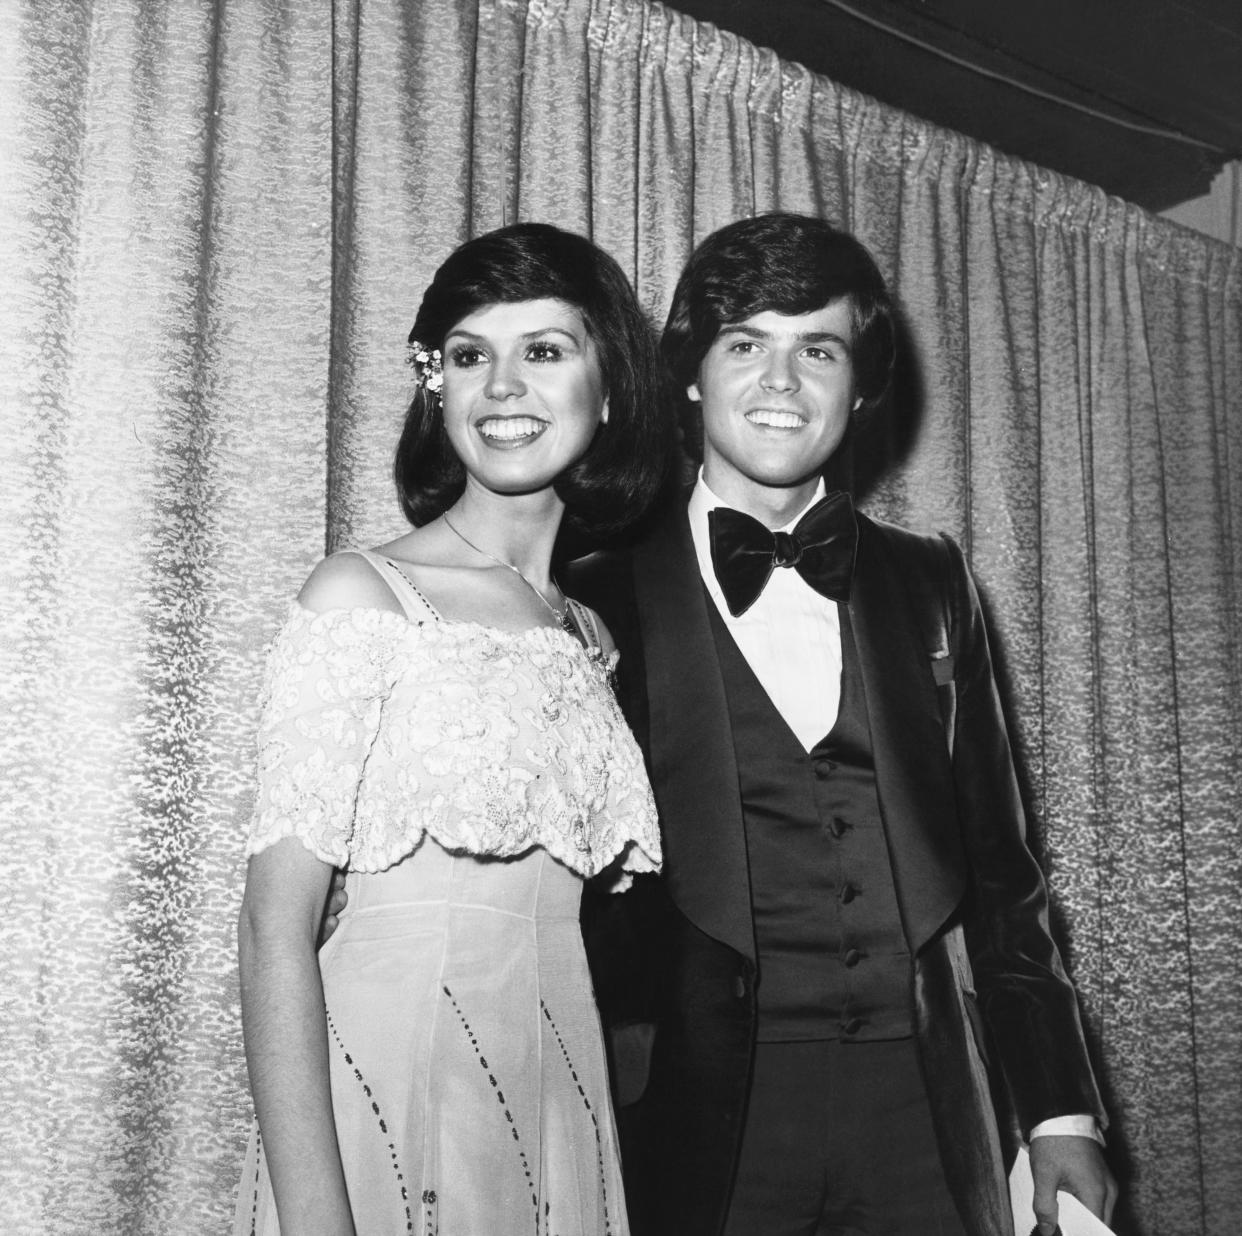 Siblings Marie and Donny Osmond, pictured here in 1976, starred in their own show from that year until 1979. (Photo: Everett Collection)
